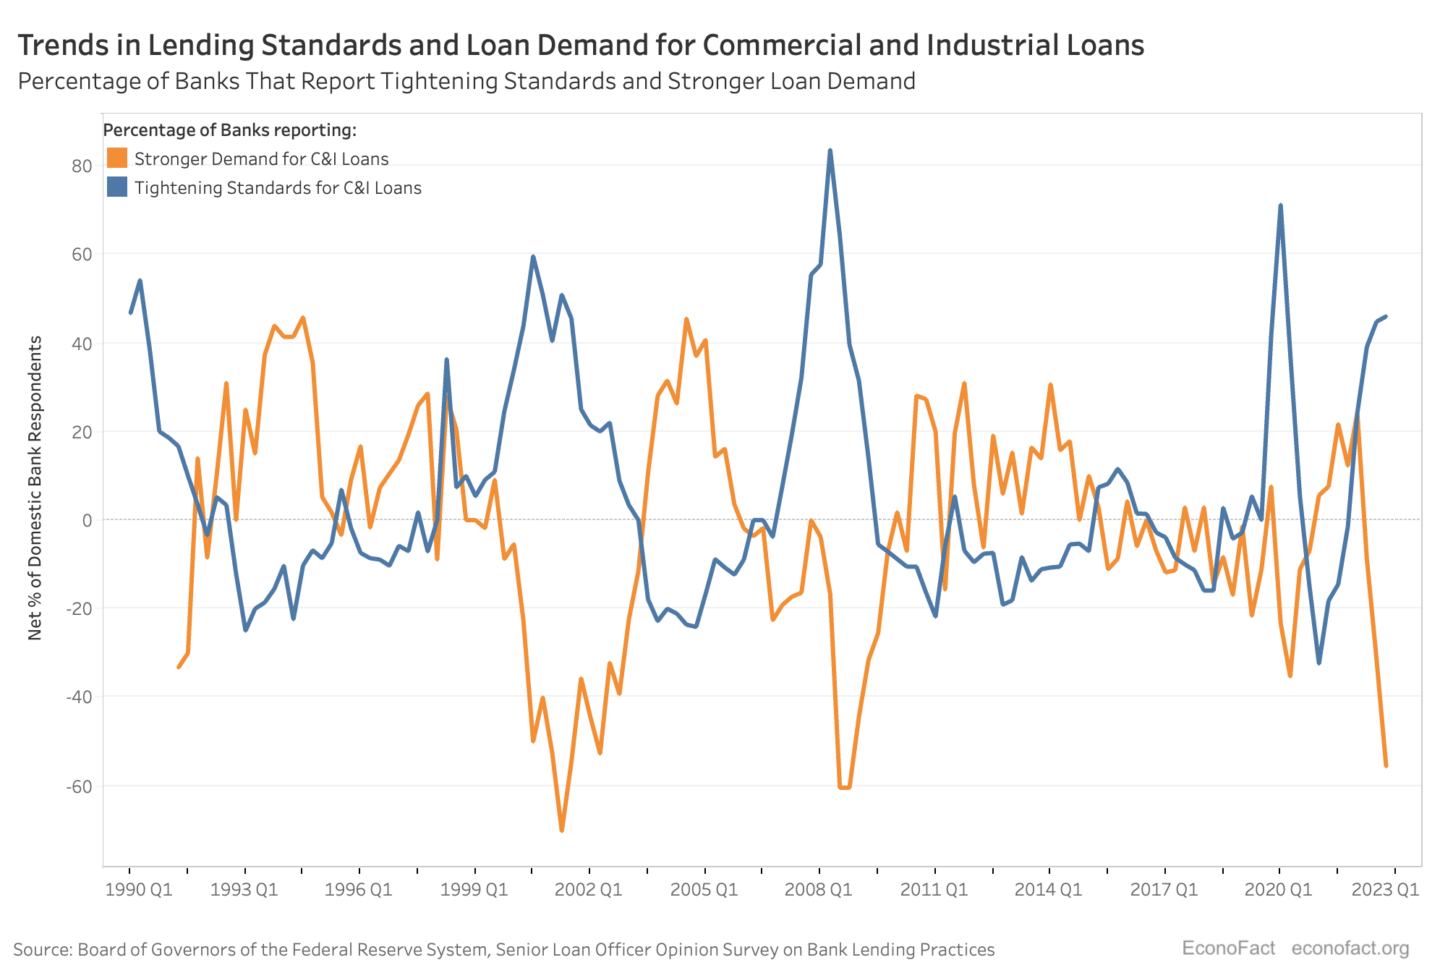 Percentage of Banks That Report Tightening Standards and Stronger Loan Demand, 1990-2023Q1